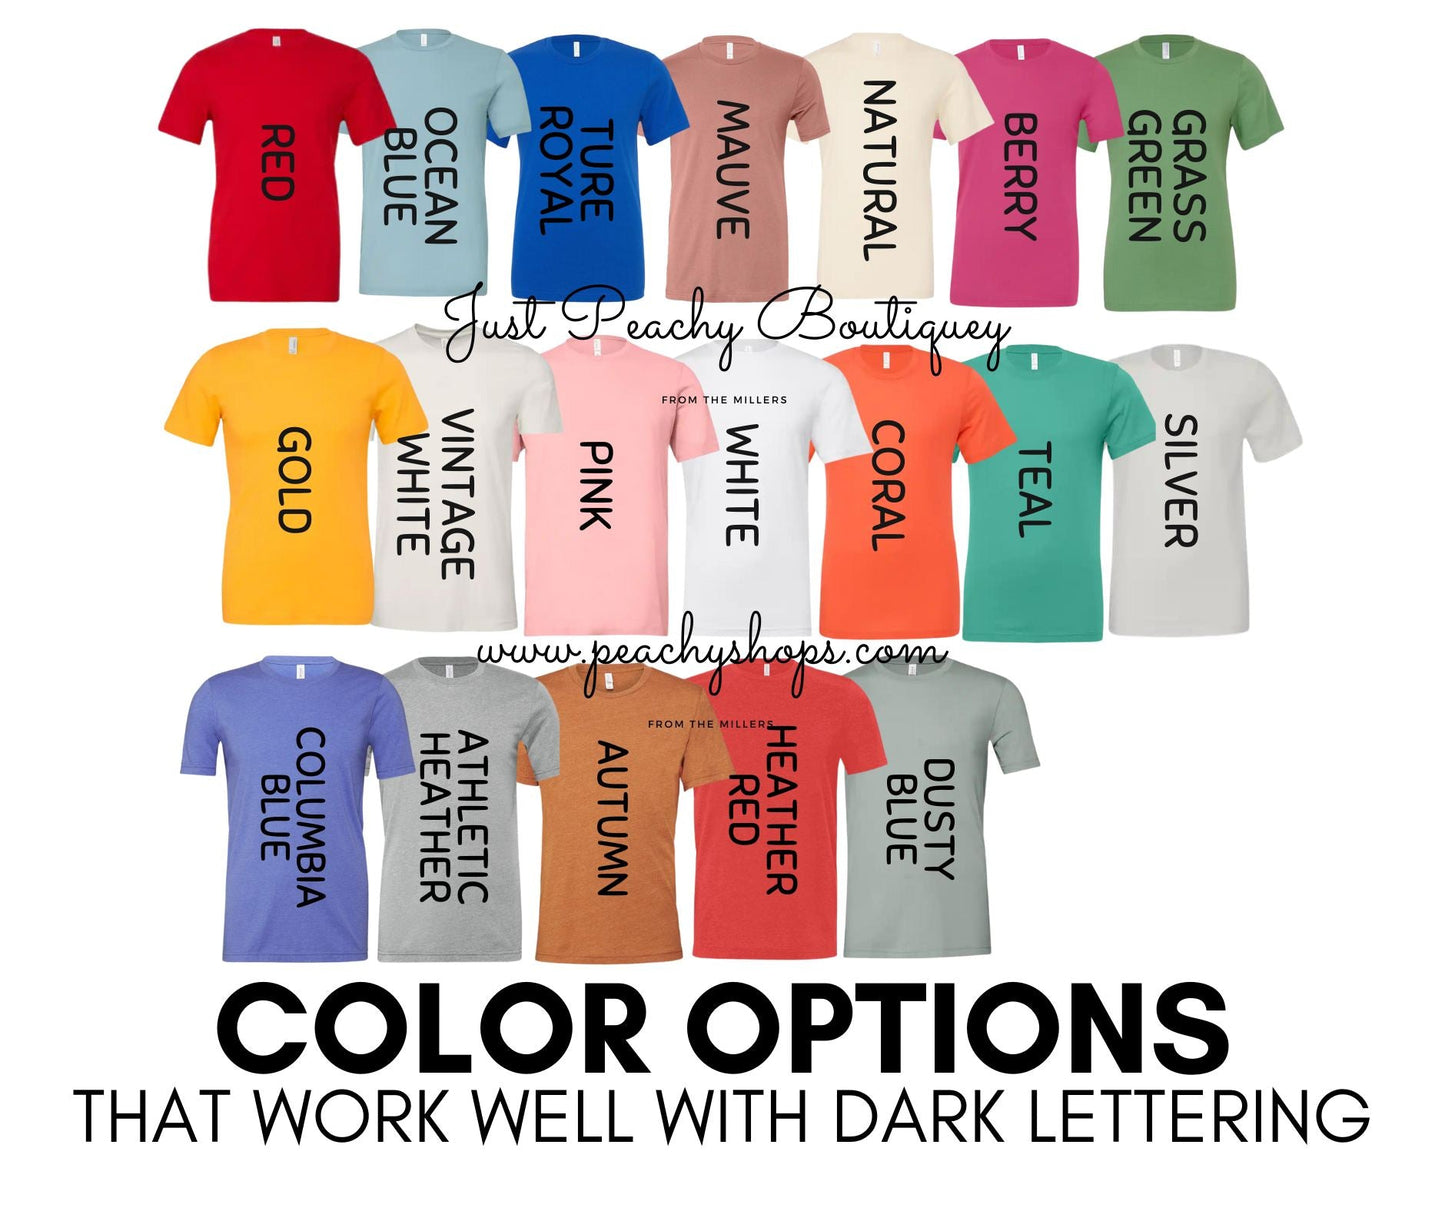 JUST A LITTLE RAY OF PITCH BLACK - PICK FROM 200 COLOR & STYLE OPTIONS! - TAT 4-7 DAYS